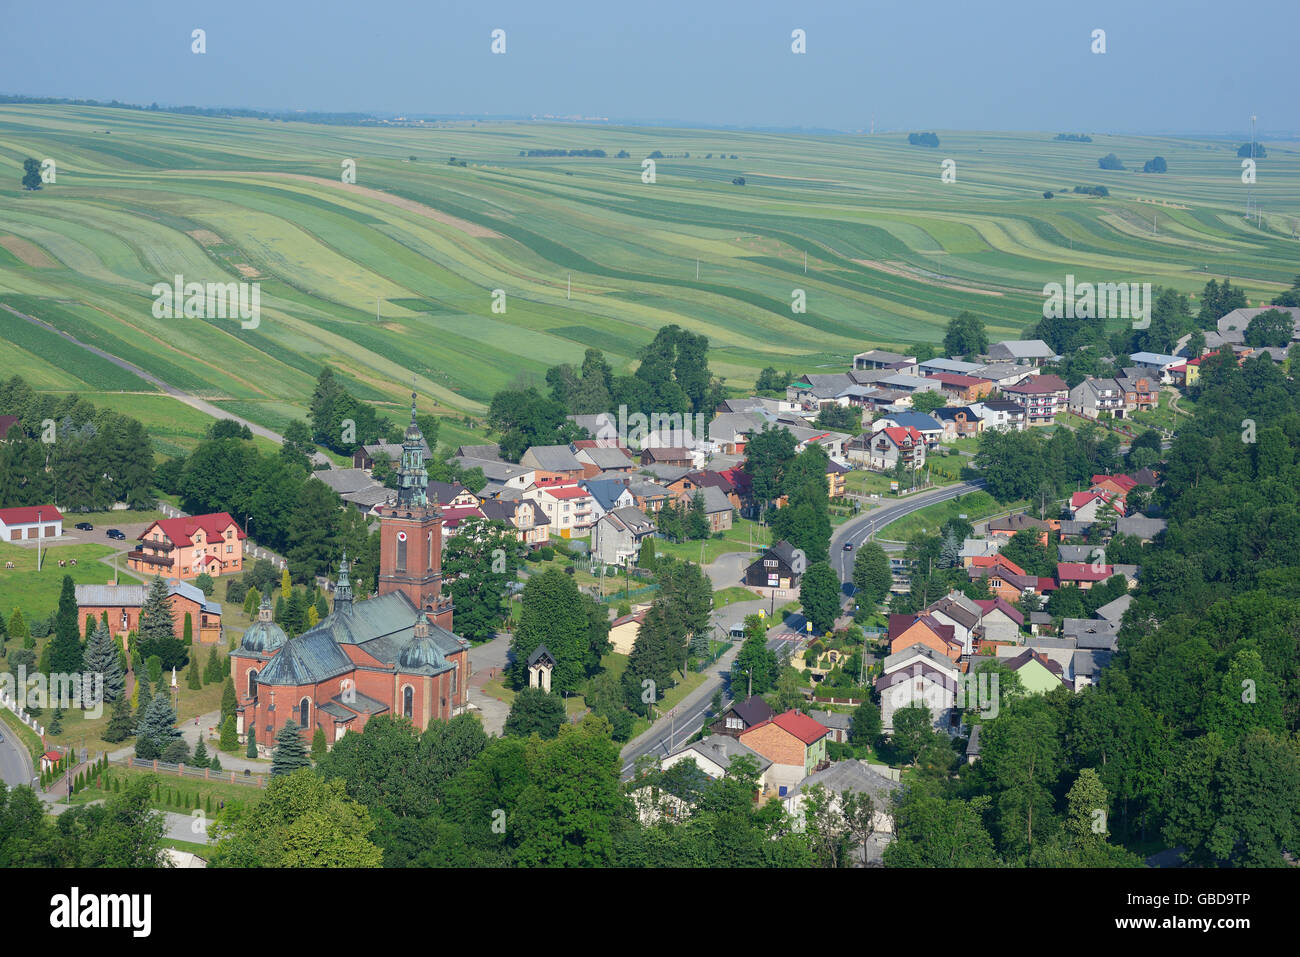 AERIAL VIEW. Village surrounded by a landscape of green narrow fields. Suloszowa, Lesser Poland Region, Poland. Stock Photo